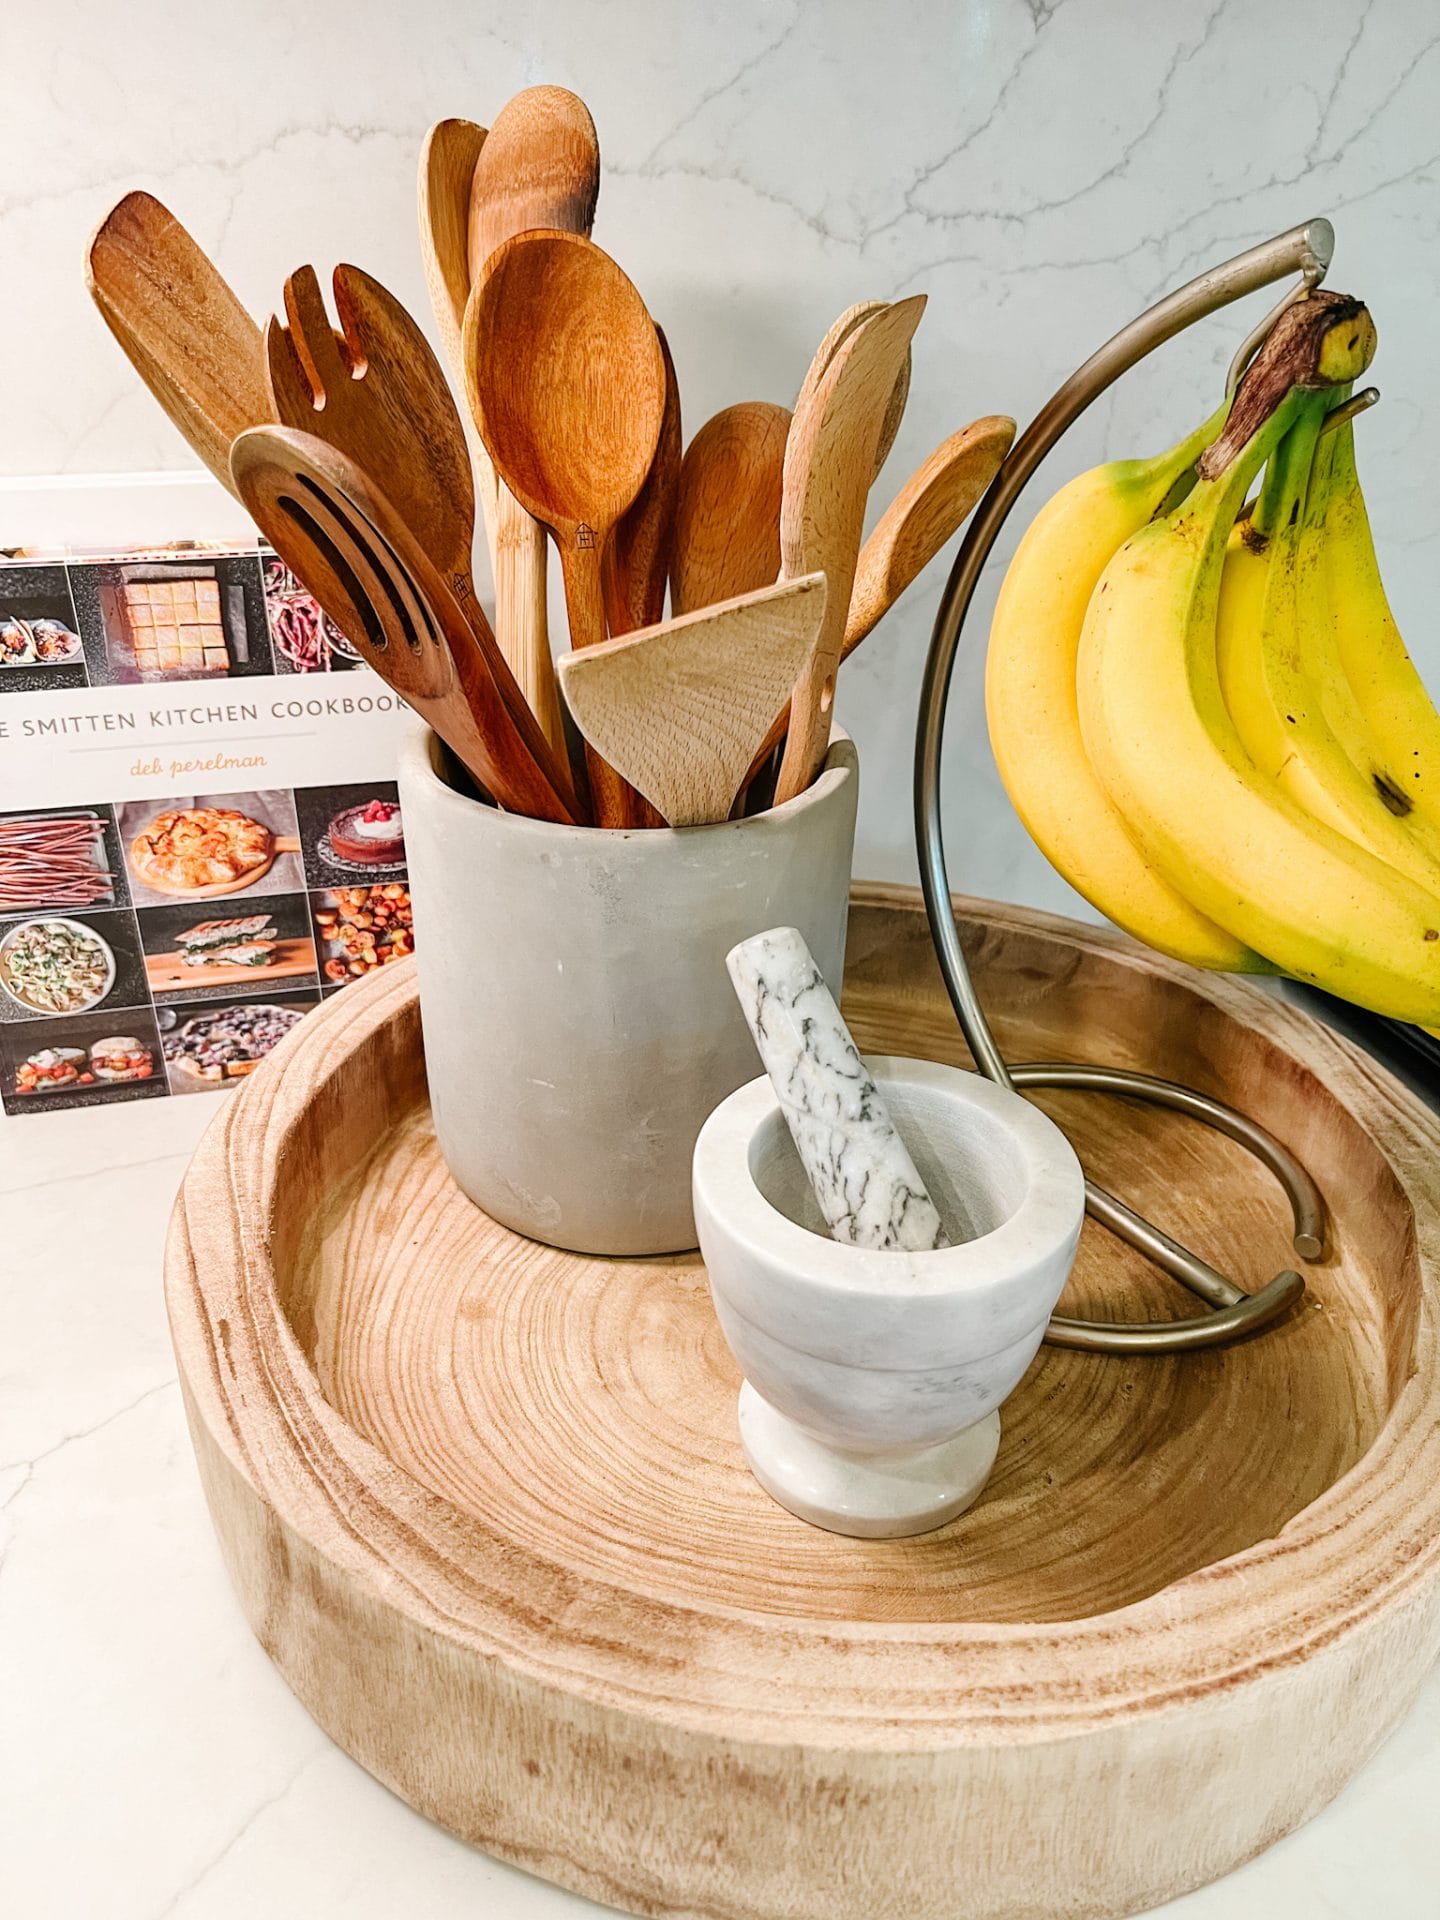 Wooden Tray, Mortar and Pestle, Banana Hook, Wooden spoons